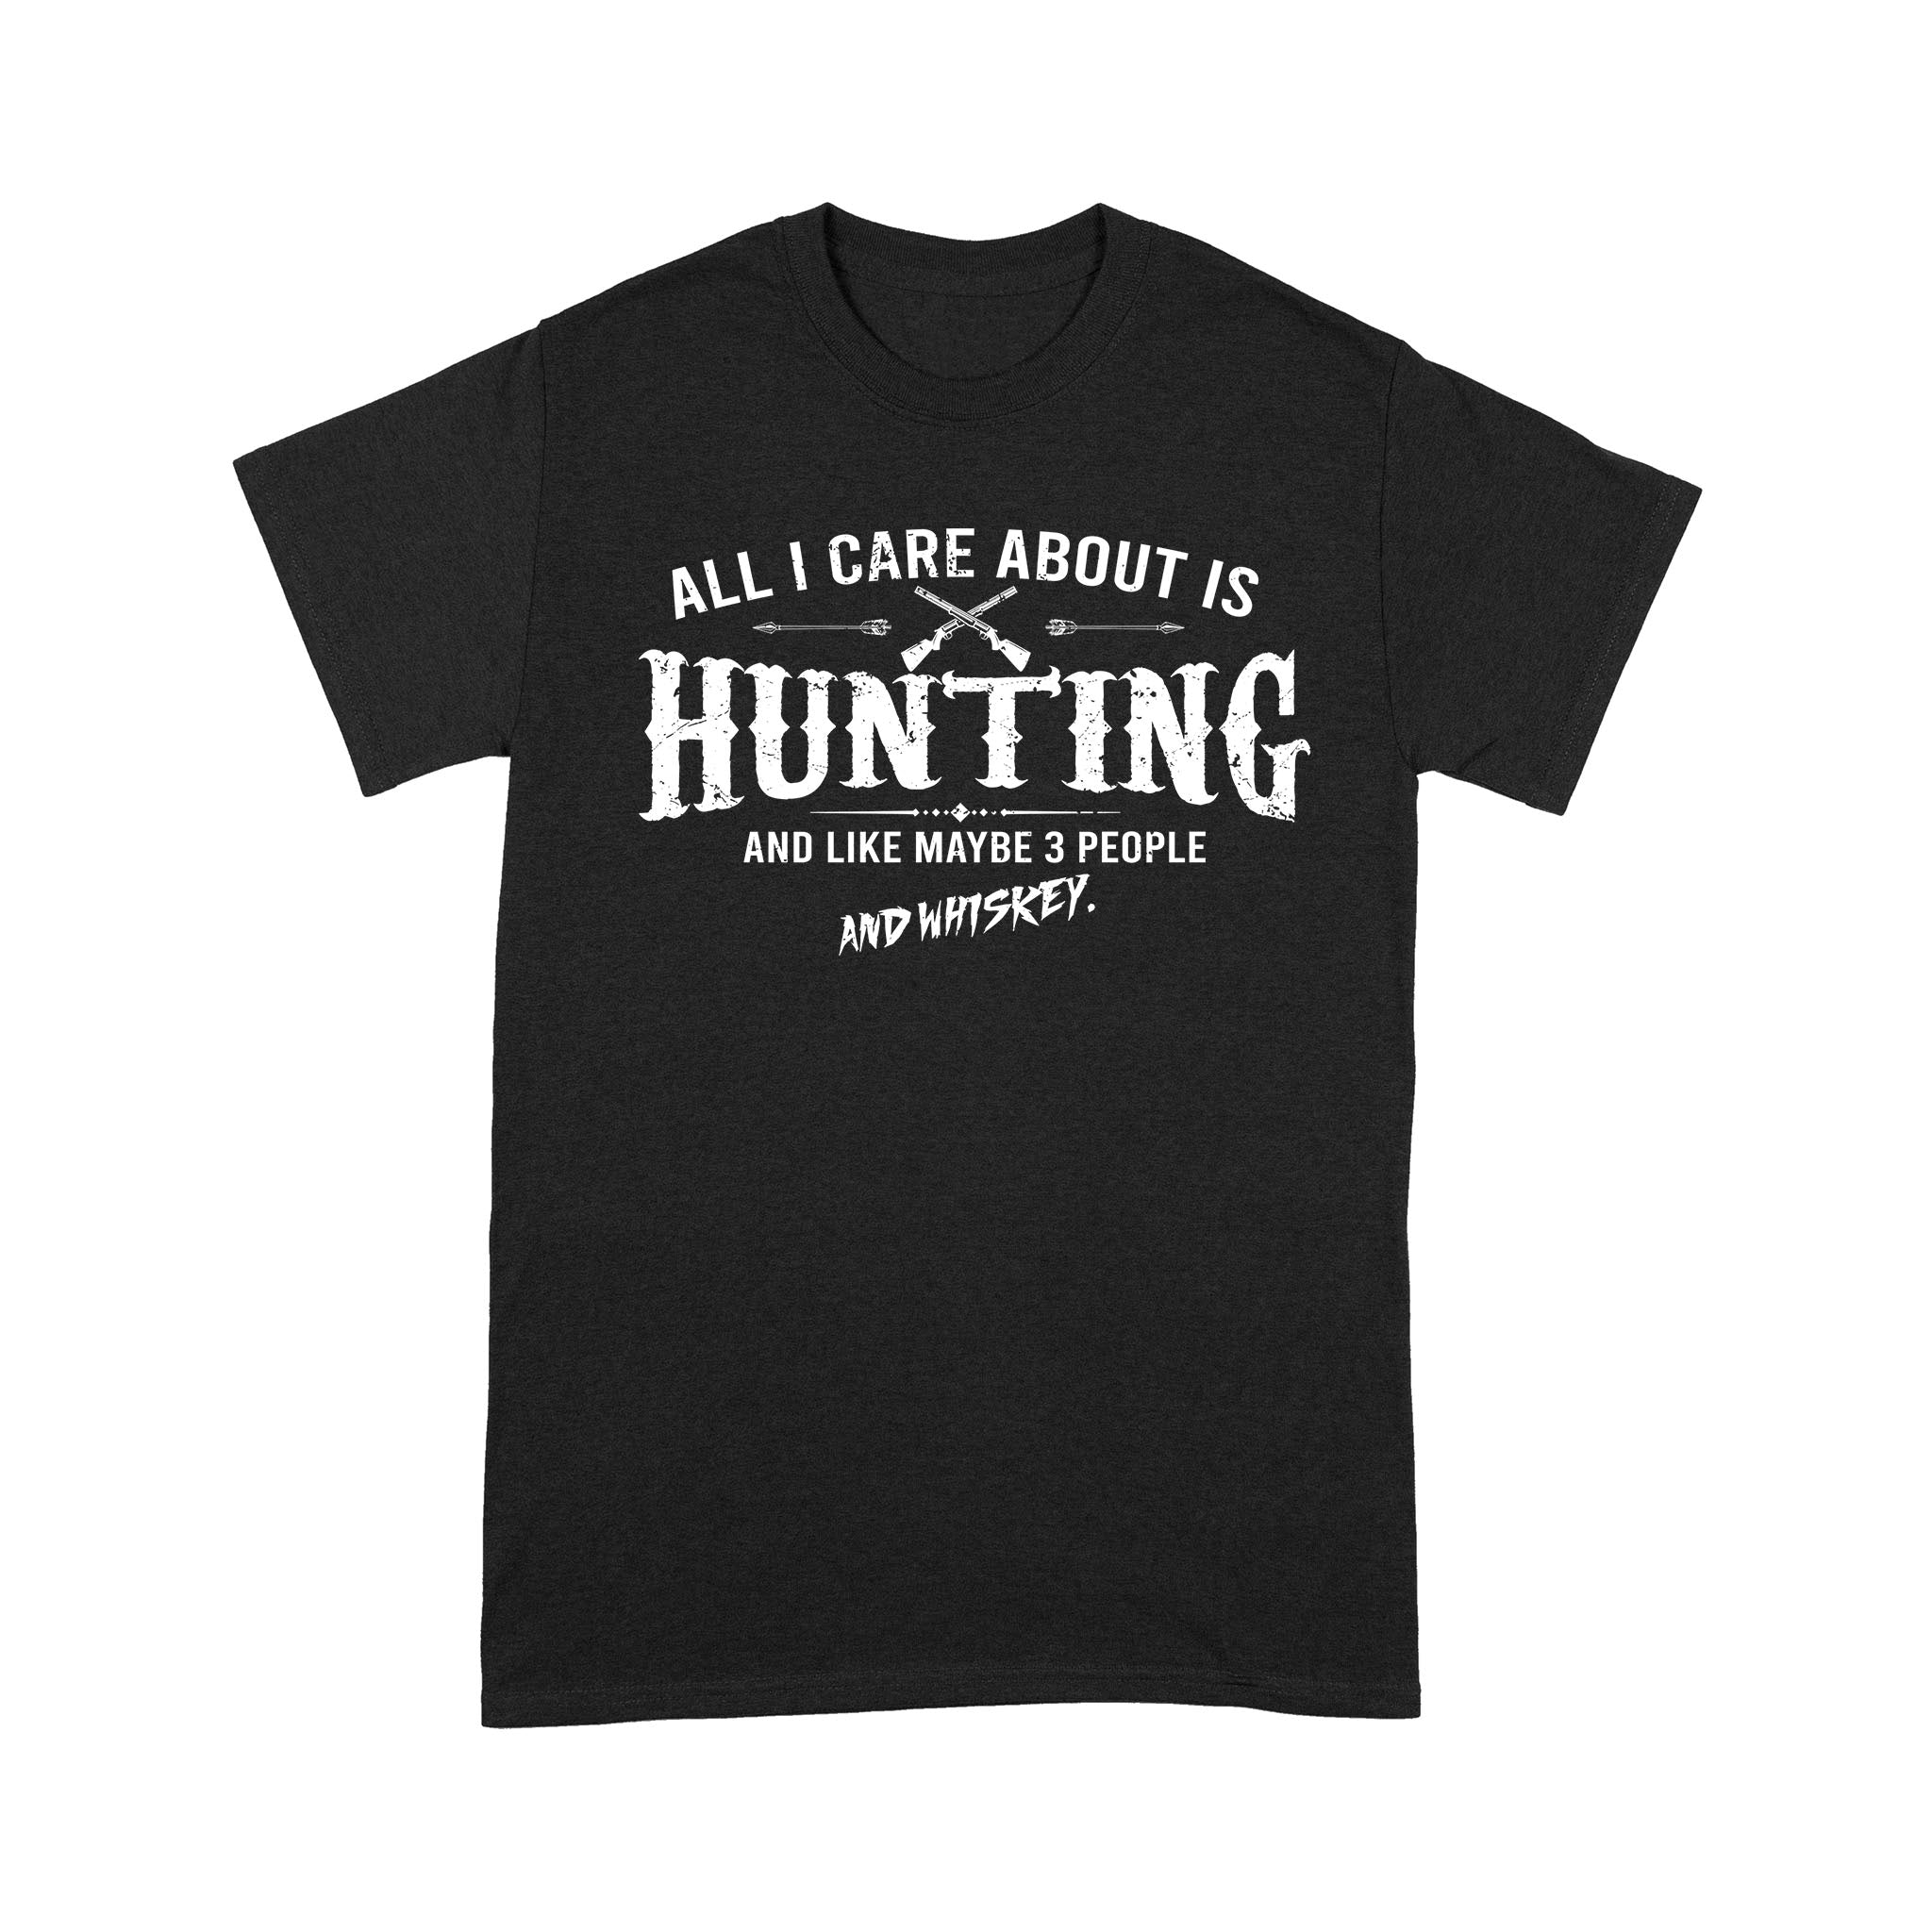 All I care about is hunting and like maybe 3 people and whiskey hunting T-shirt TAD01